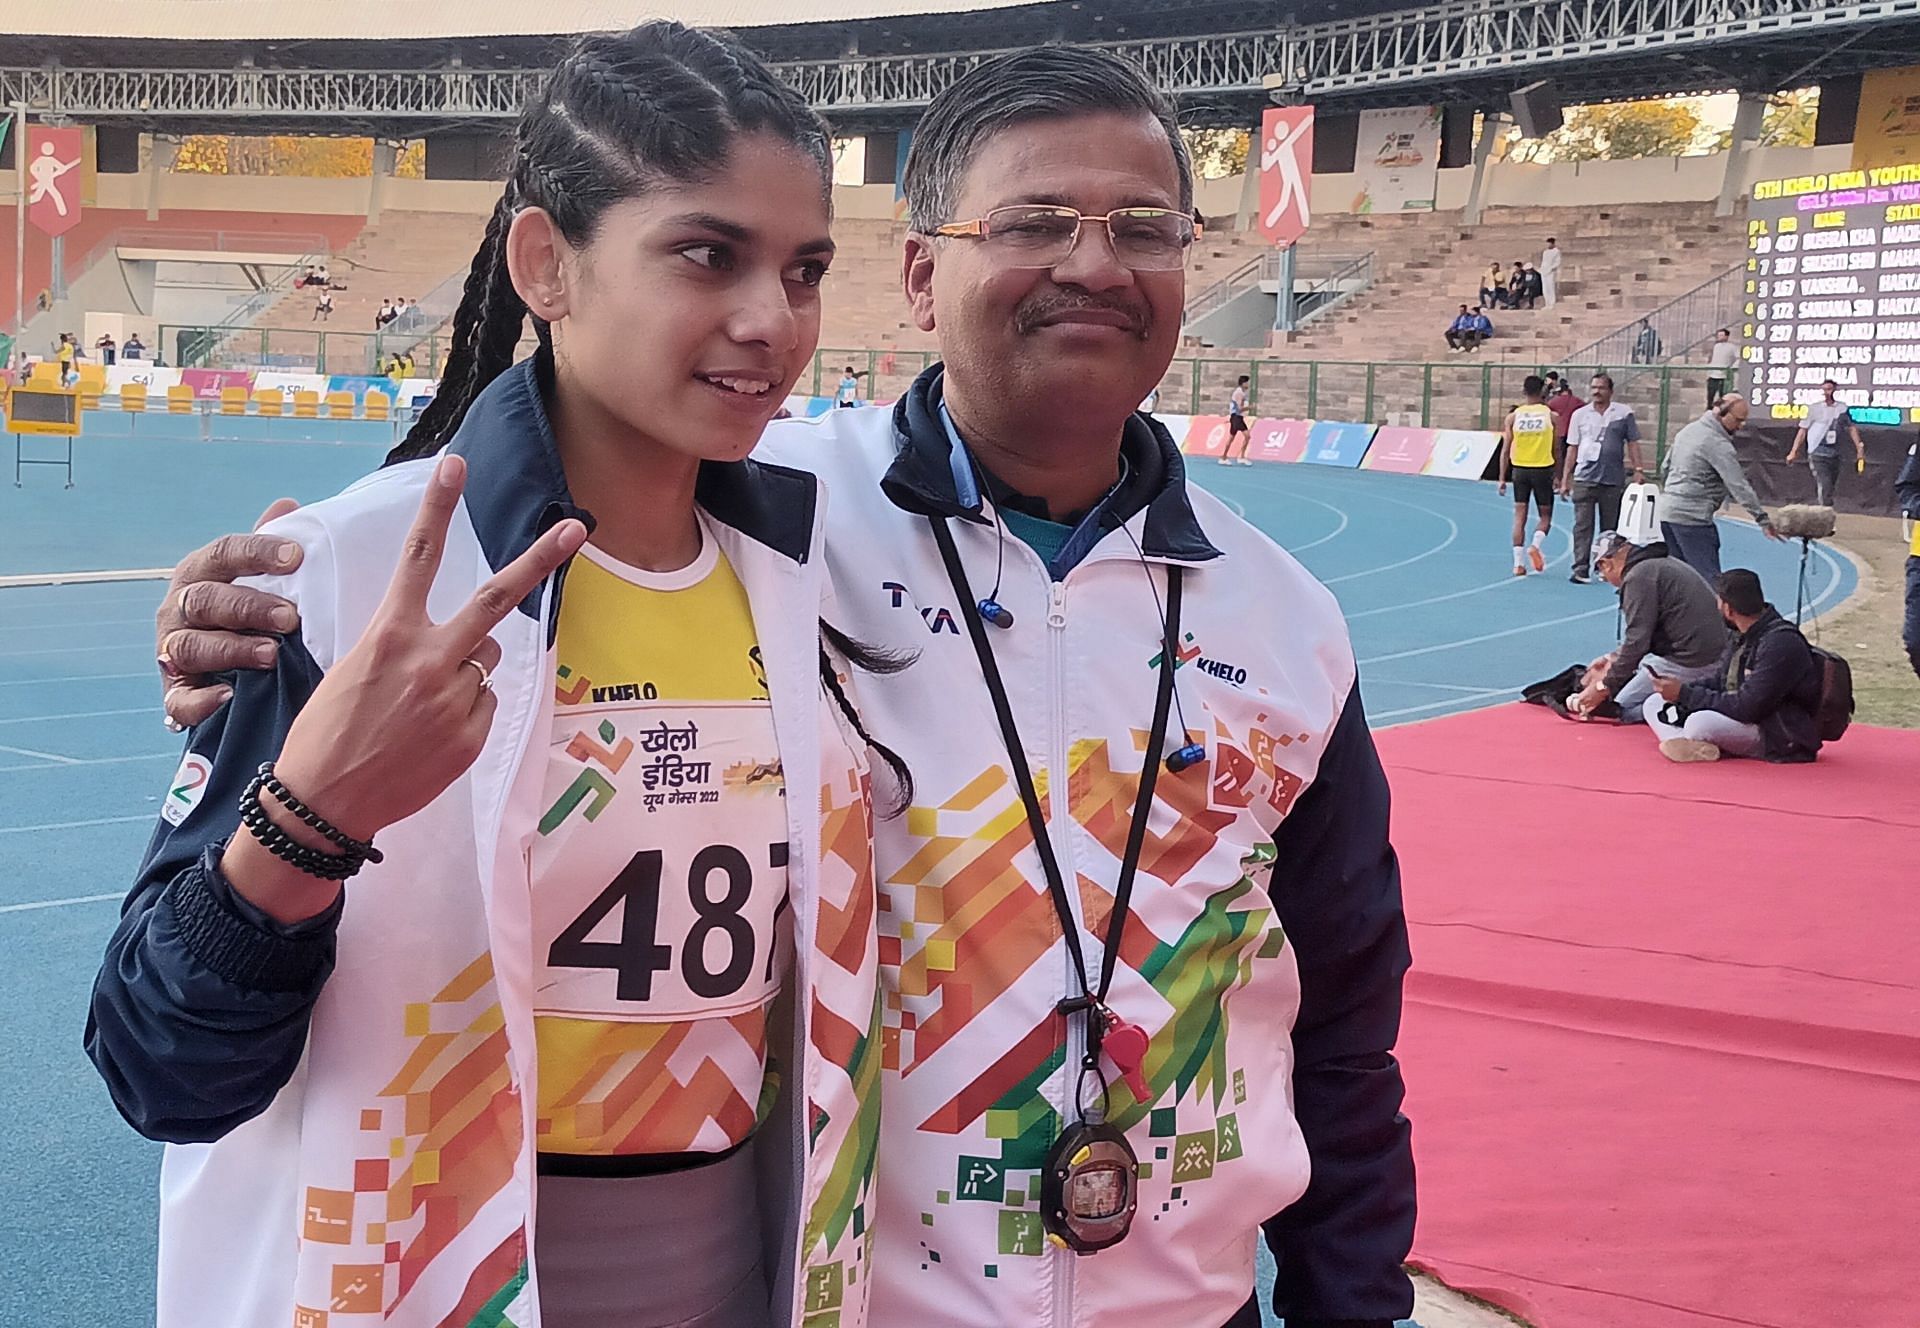 Bushra Khan with her coach SK Prasad. She won gold in the 3000m race at the Khelo India Youth Games in Bhopal on Saturday. Photo credit Navneet Singh